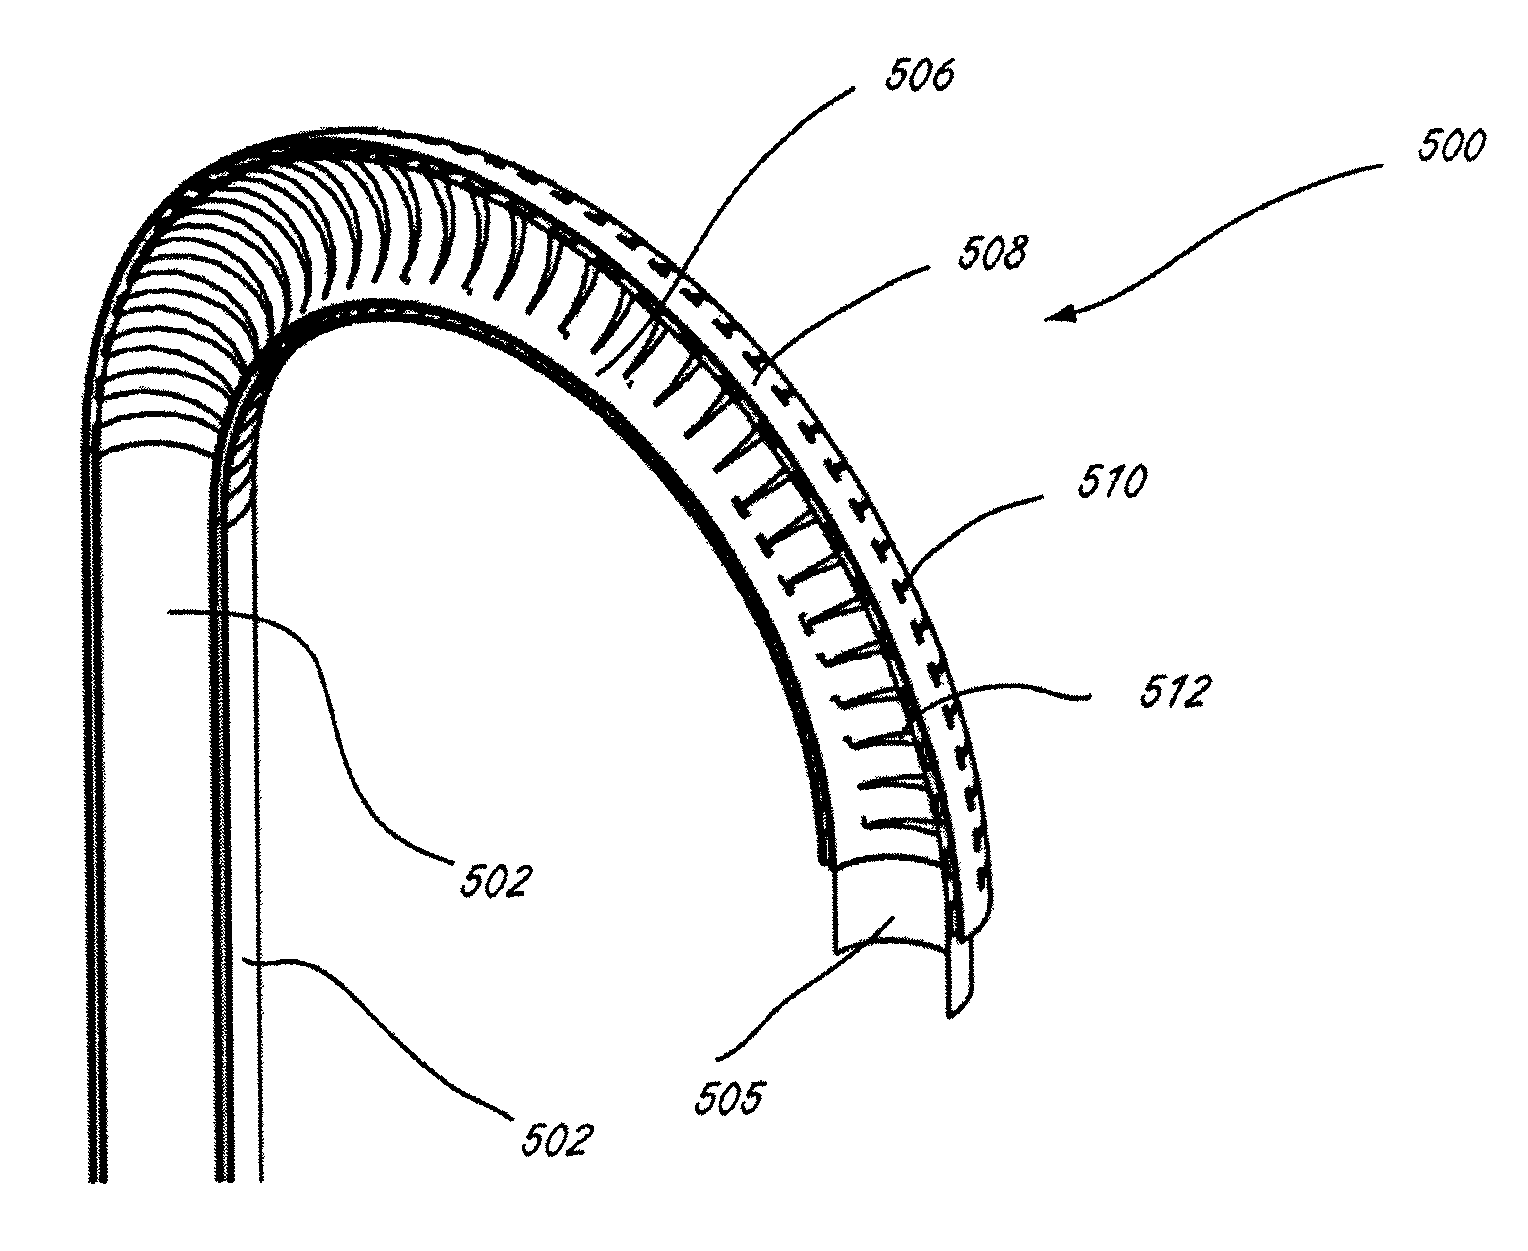 Steerable medical delivery devices and methods of use